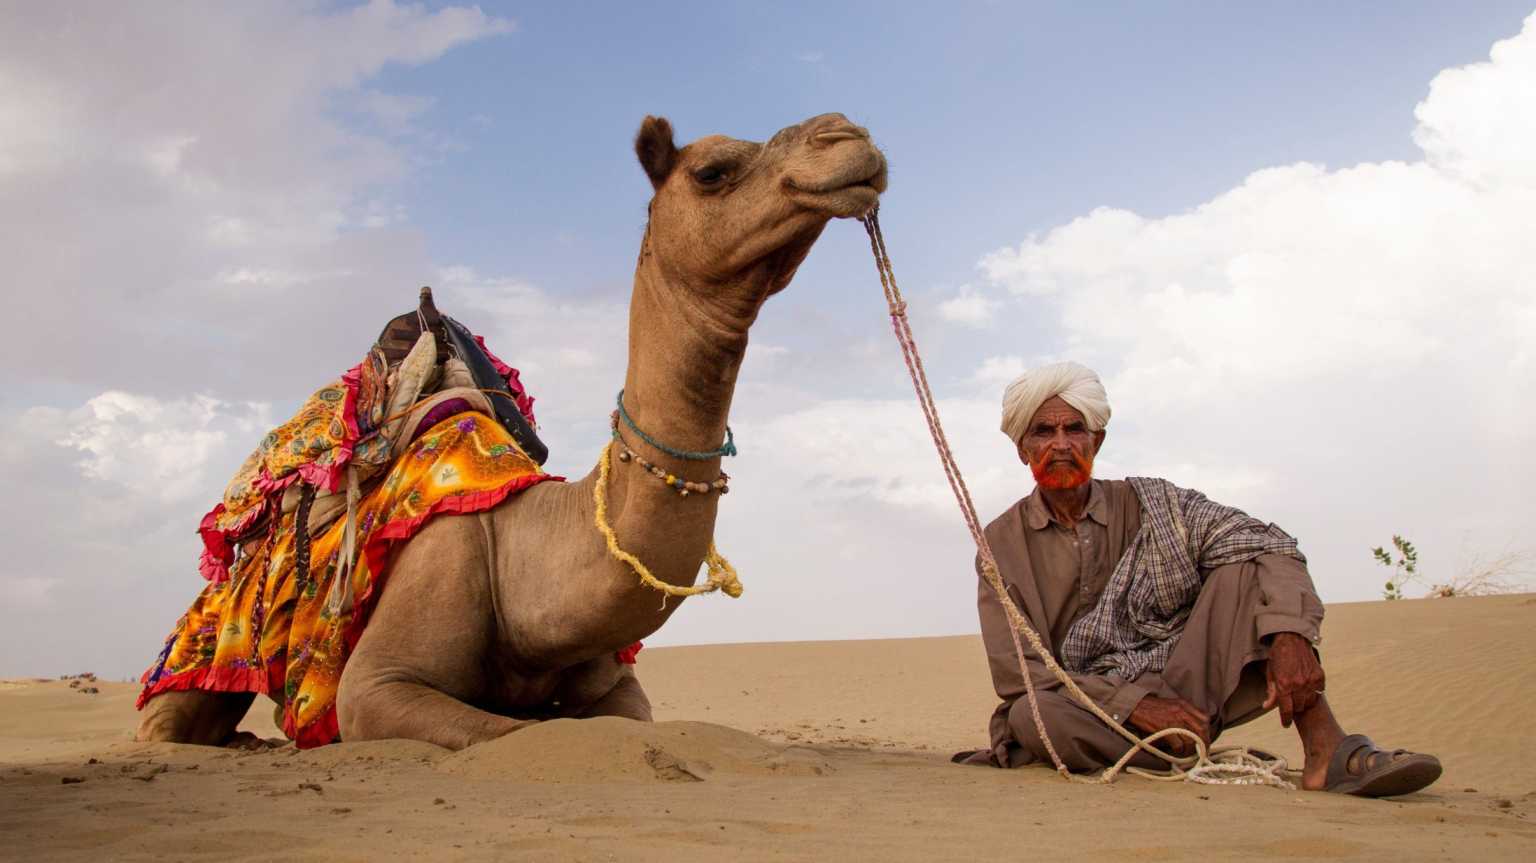 What Should Be on Your Bucket List of Things to Do in Rajasthan?